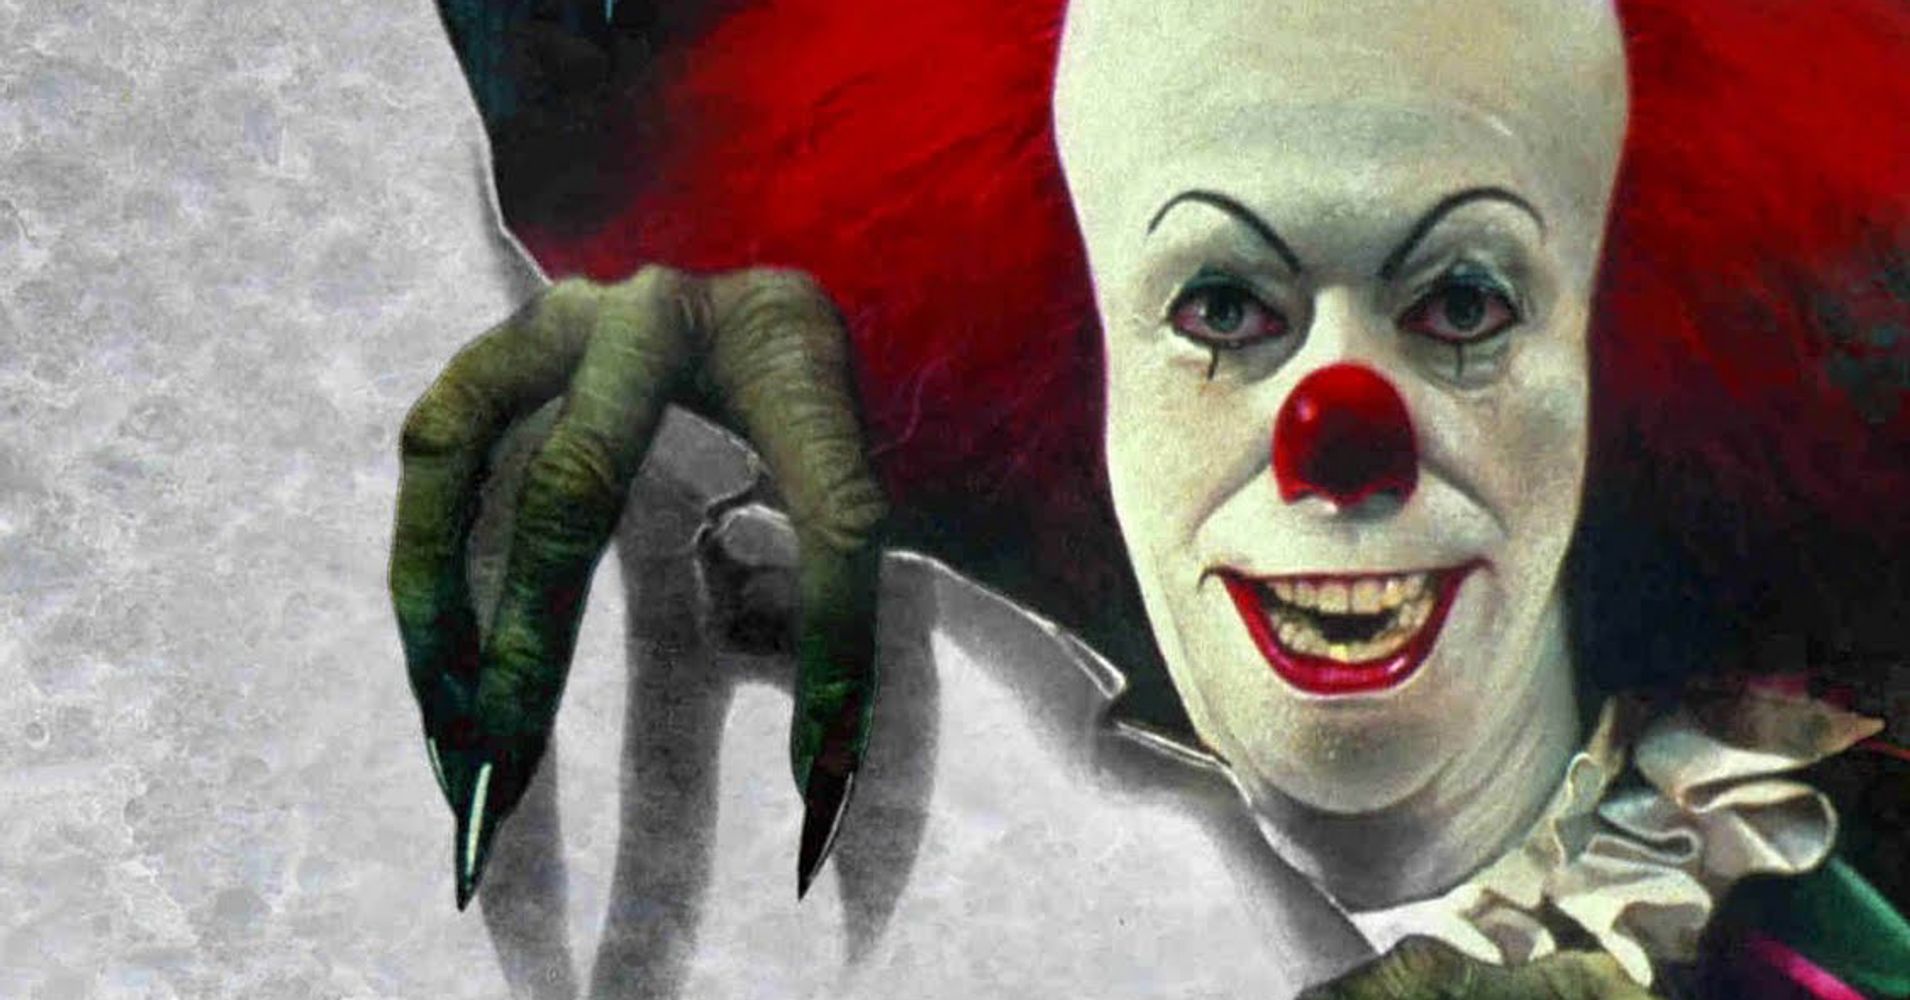 The First Look At Pennywise The Clown From The New 'It' Film Is